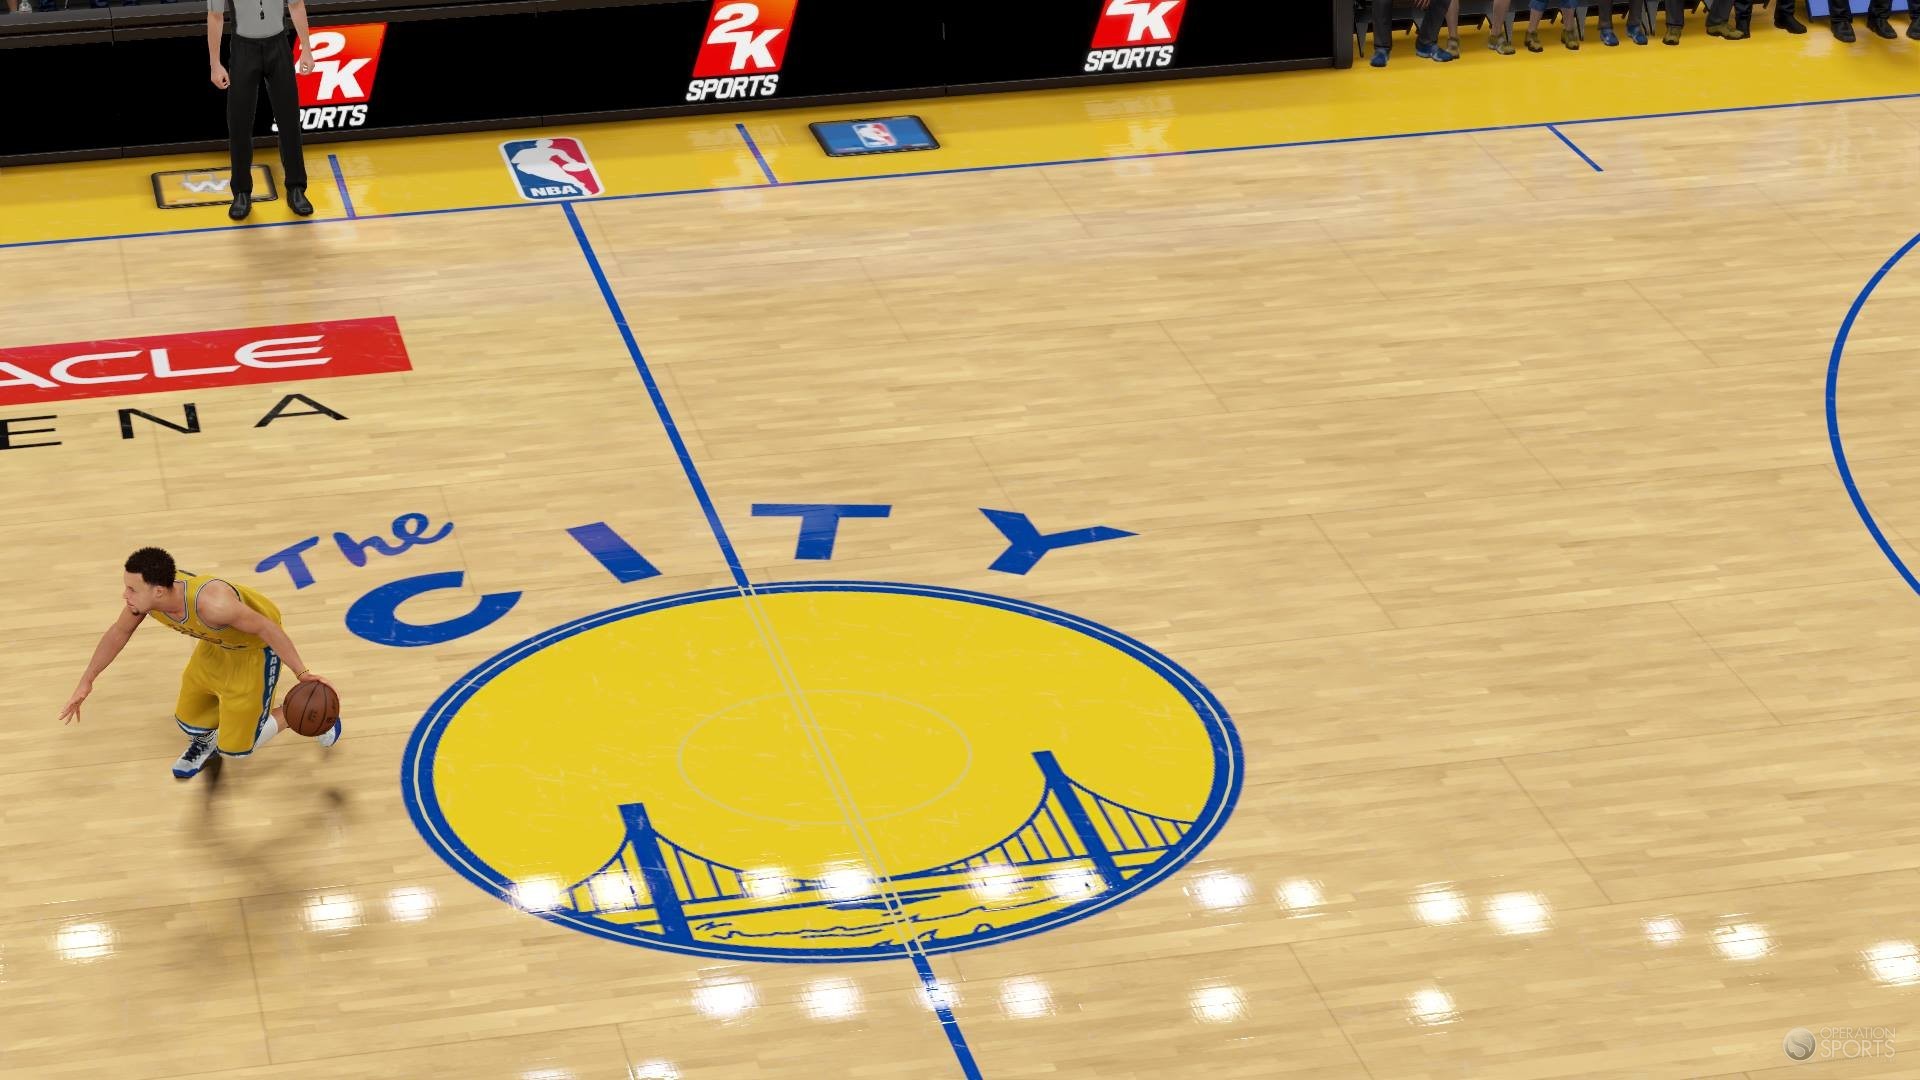 1920x1080 NBA 2K16 Adds "The City" Alternate Floor For the Golden State Warriors